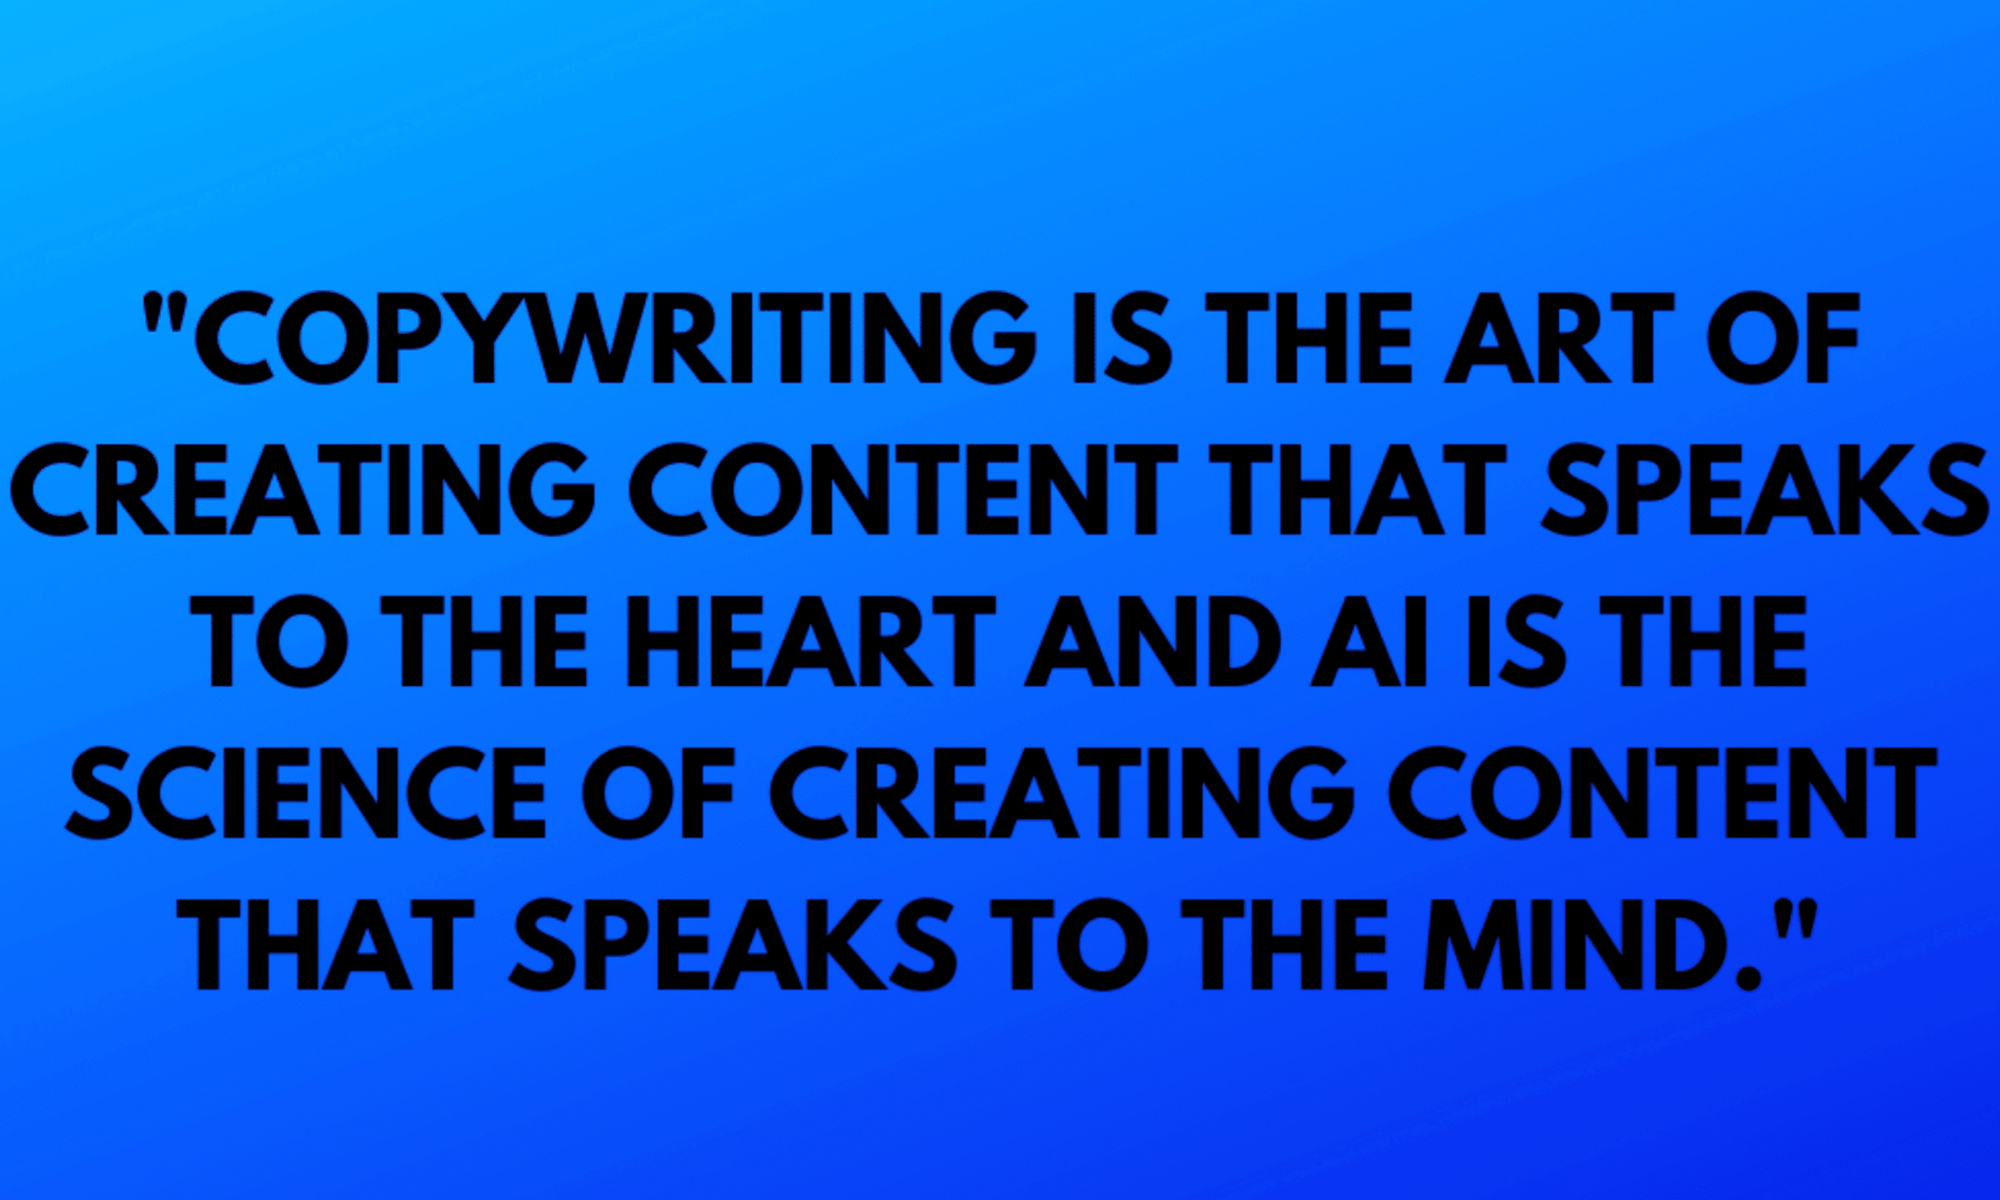 symbiotic relationship between copywriting and artificial intelligence